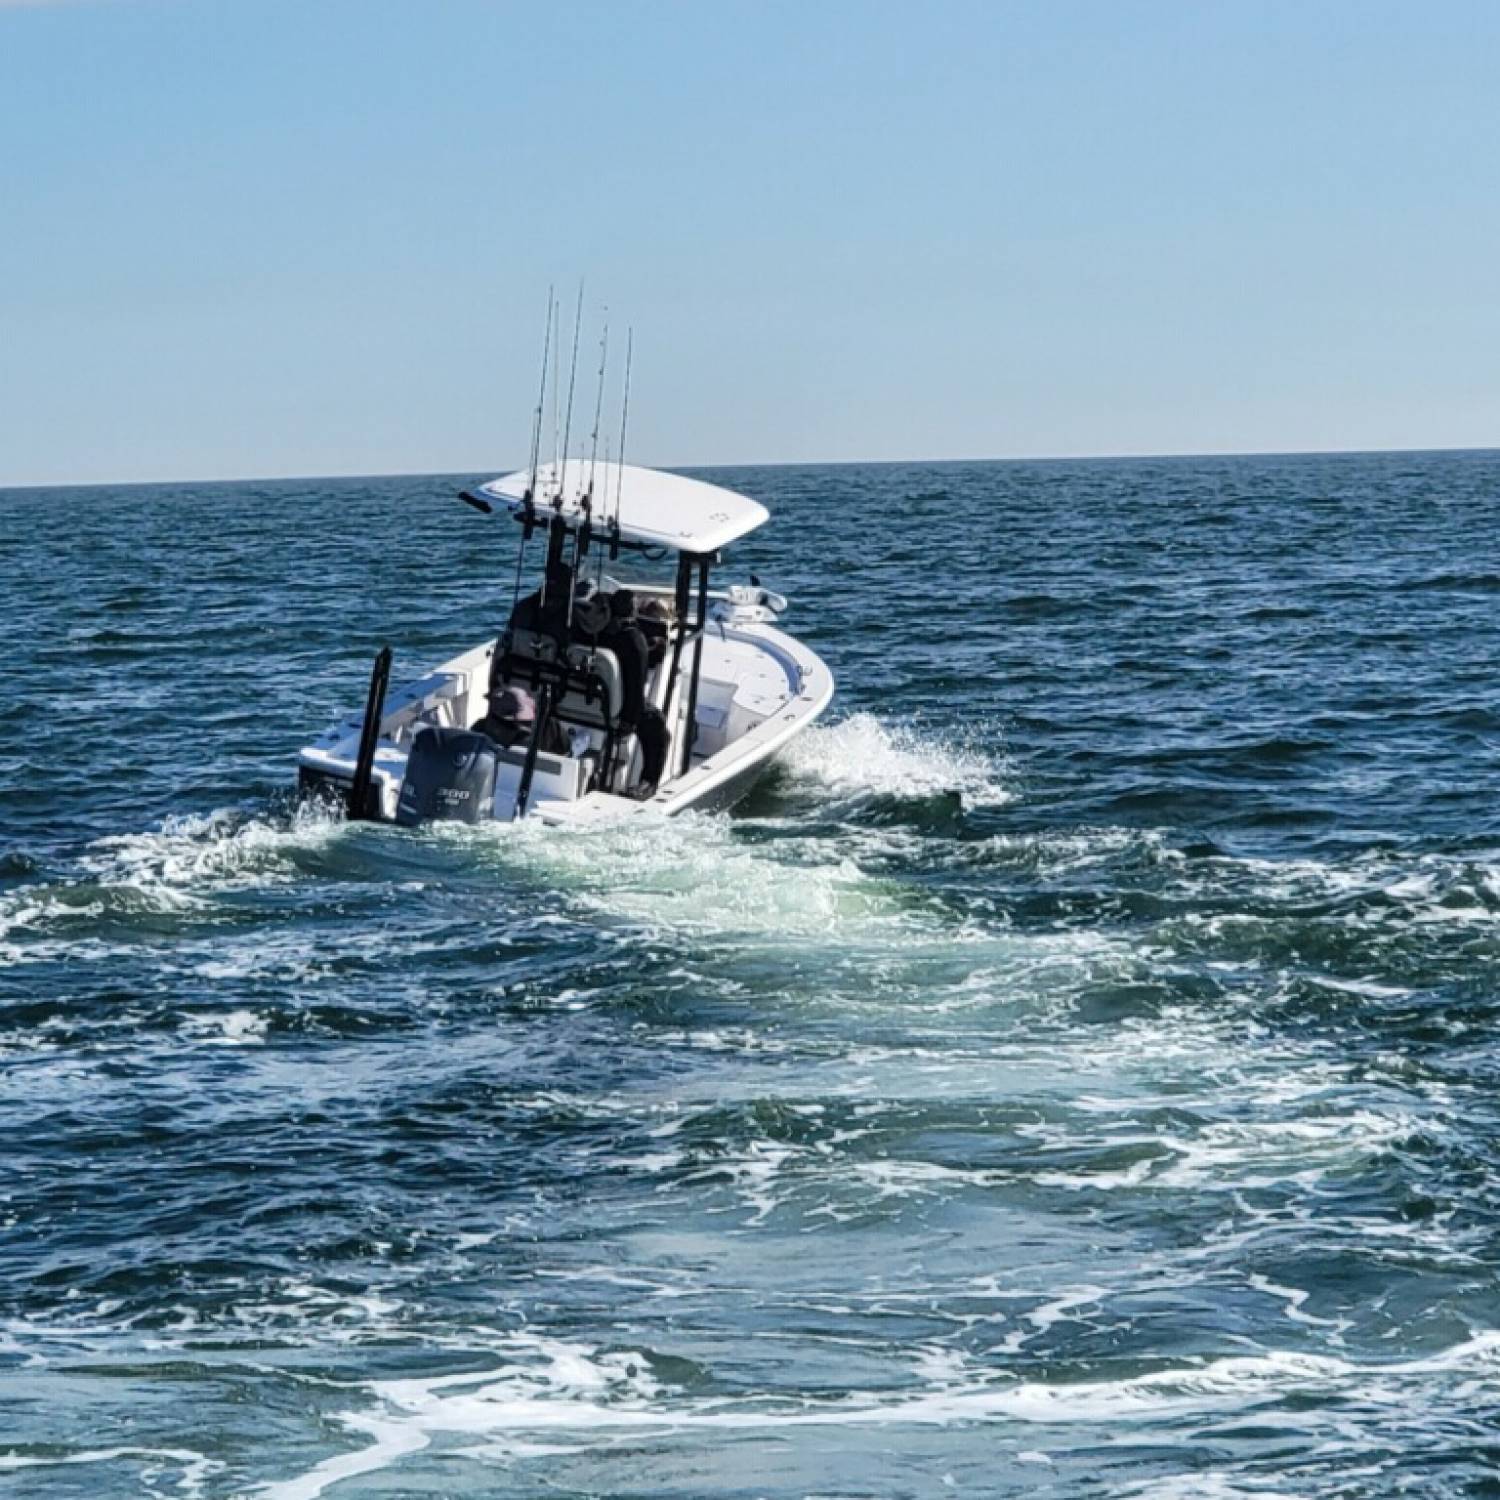 Title: Heading home! - On board their Sportsman Masters 247 Bay Boat - Location: St Simons Island, Ga. Participating in the Photo Contest #SportsmanMarch